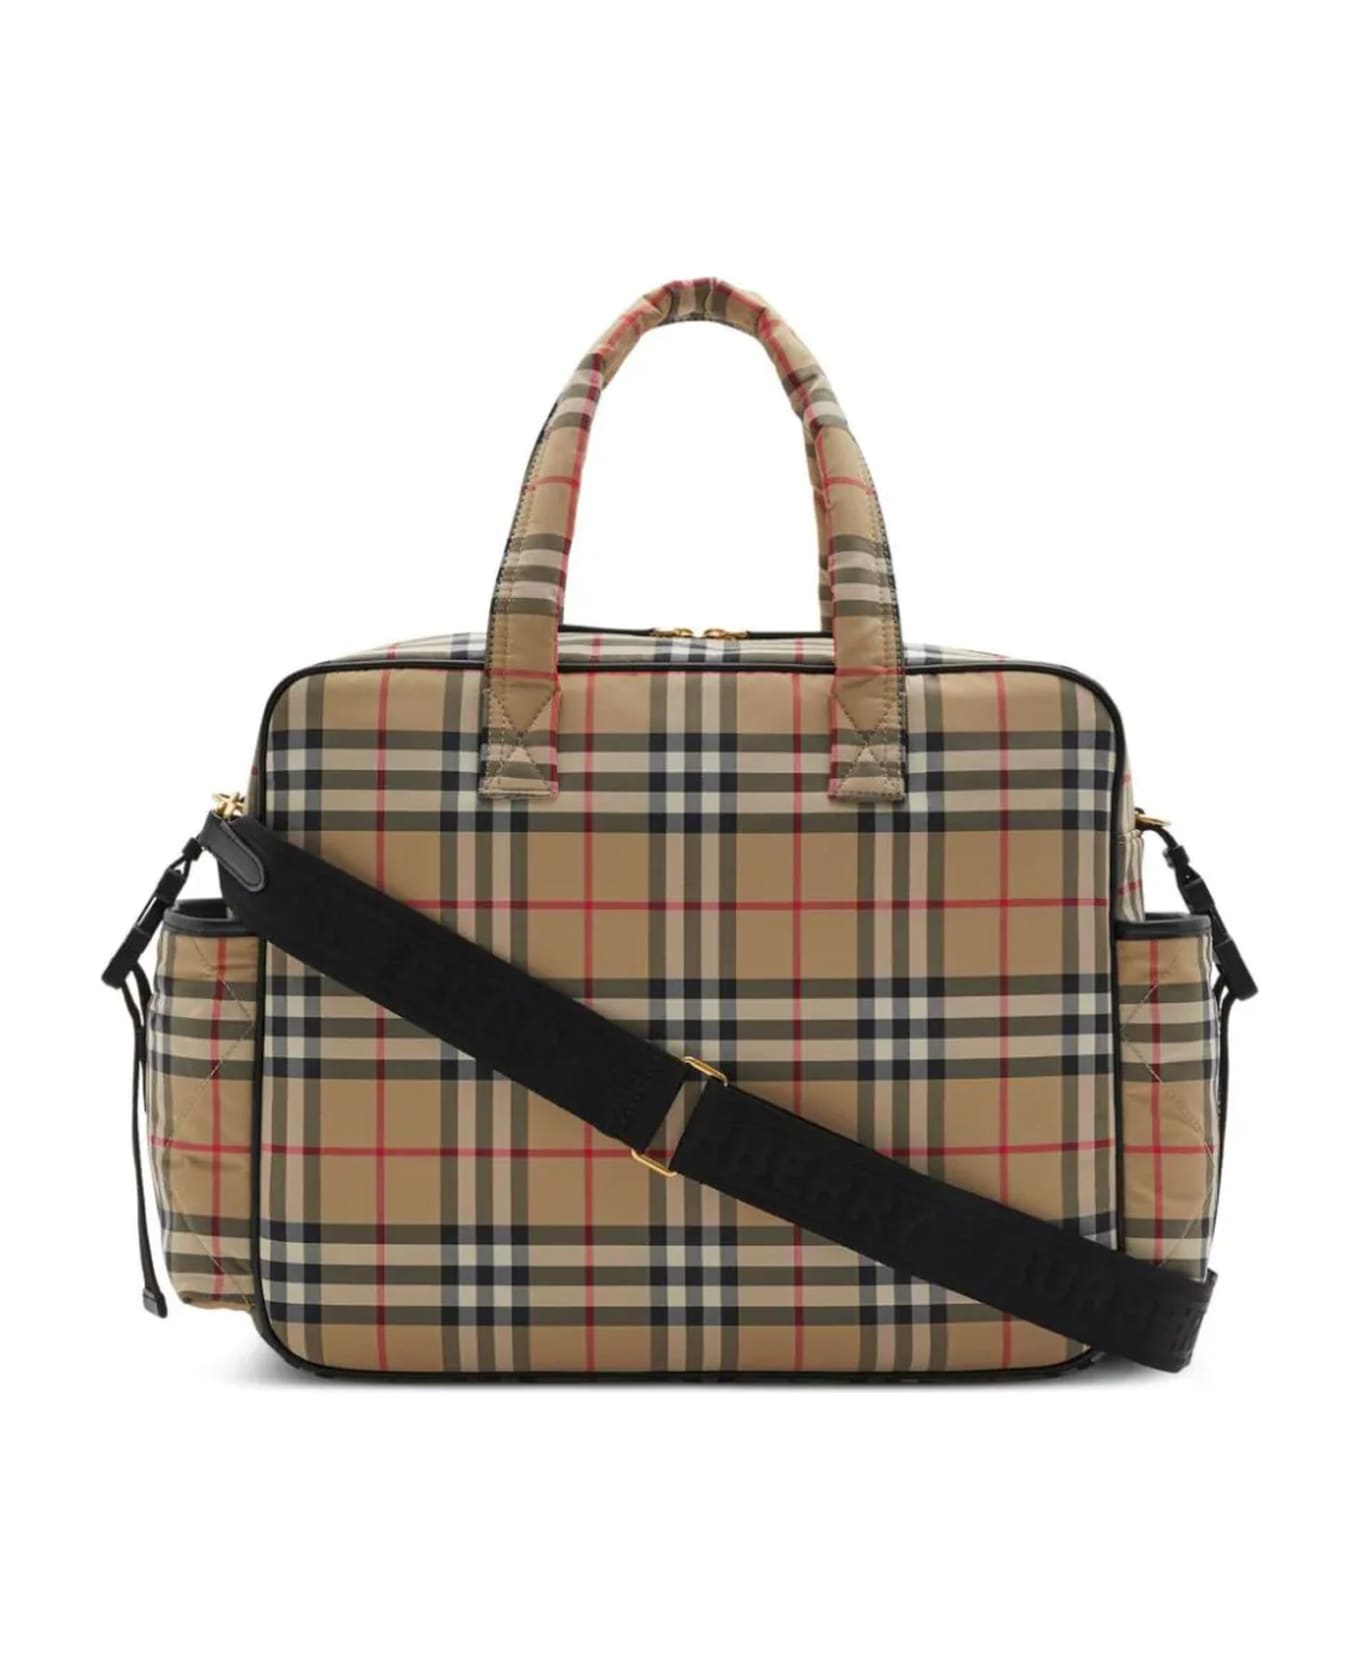 Burberry Check Polyamide Changing Bag - Archive beige chk アクセサリー＆ギフト